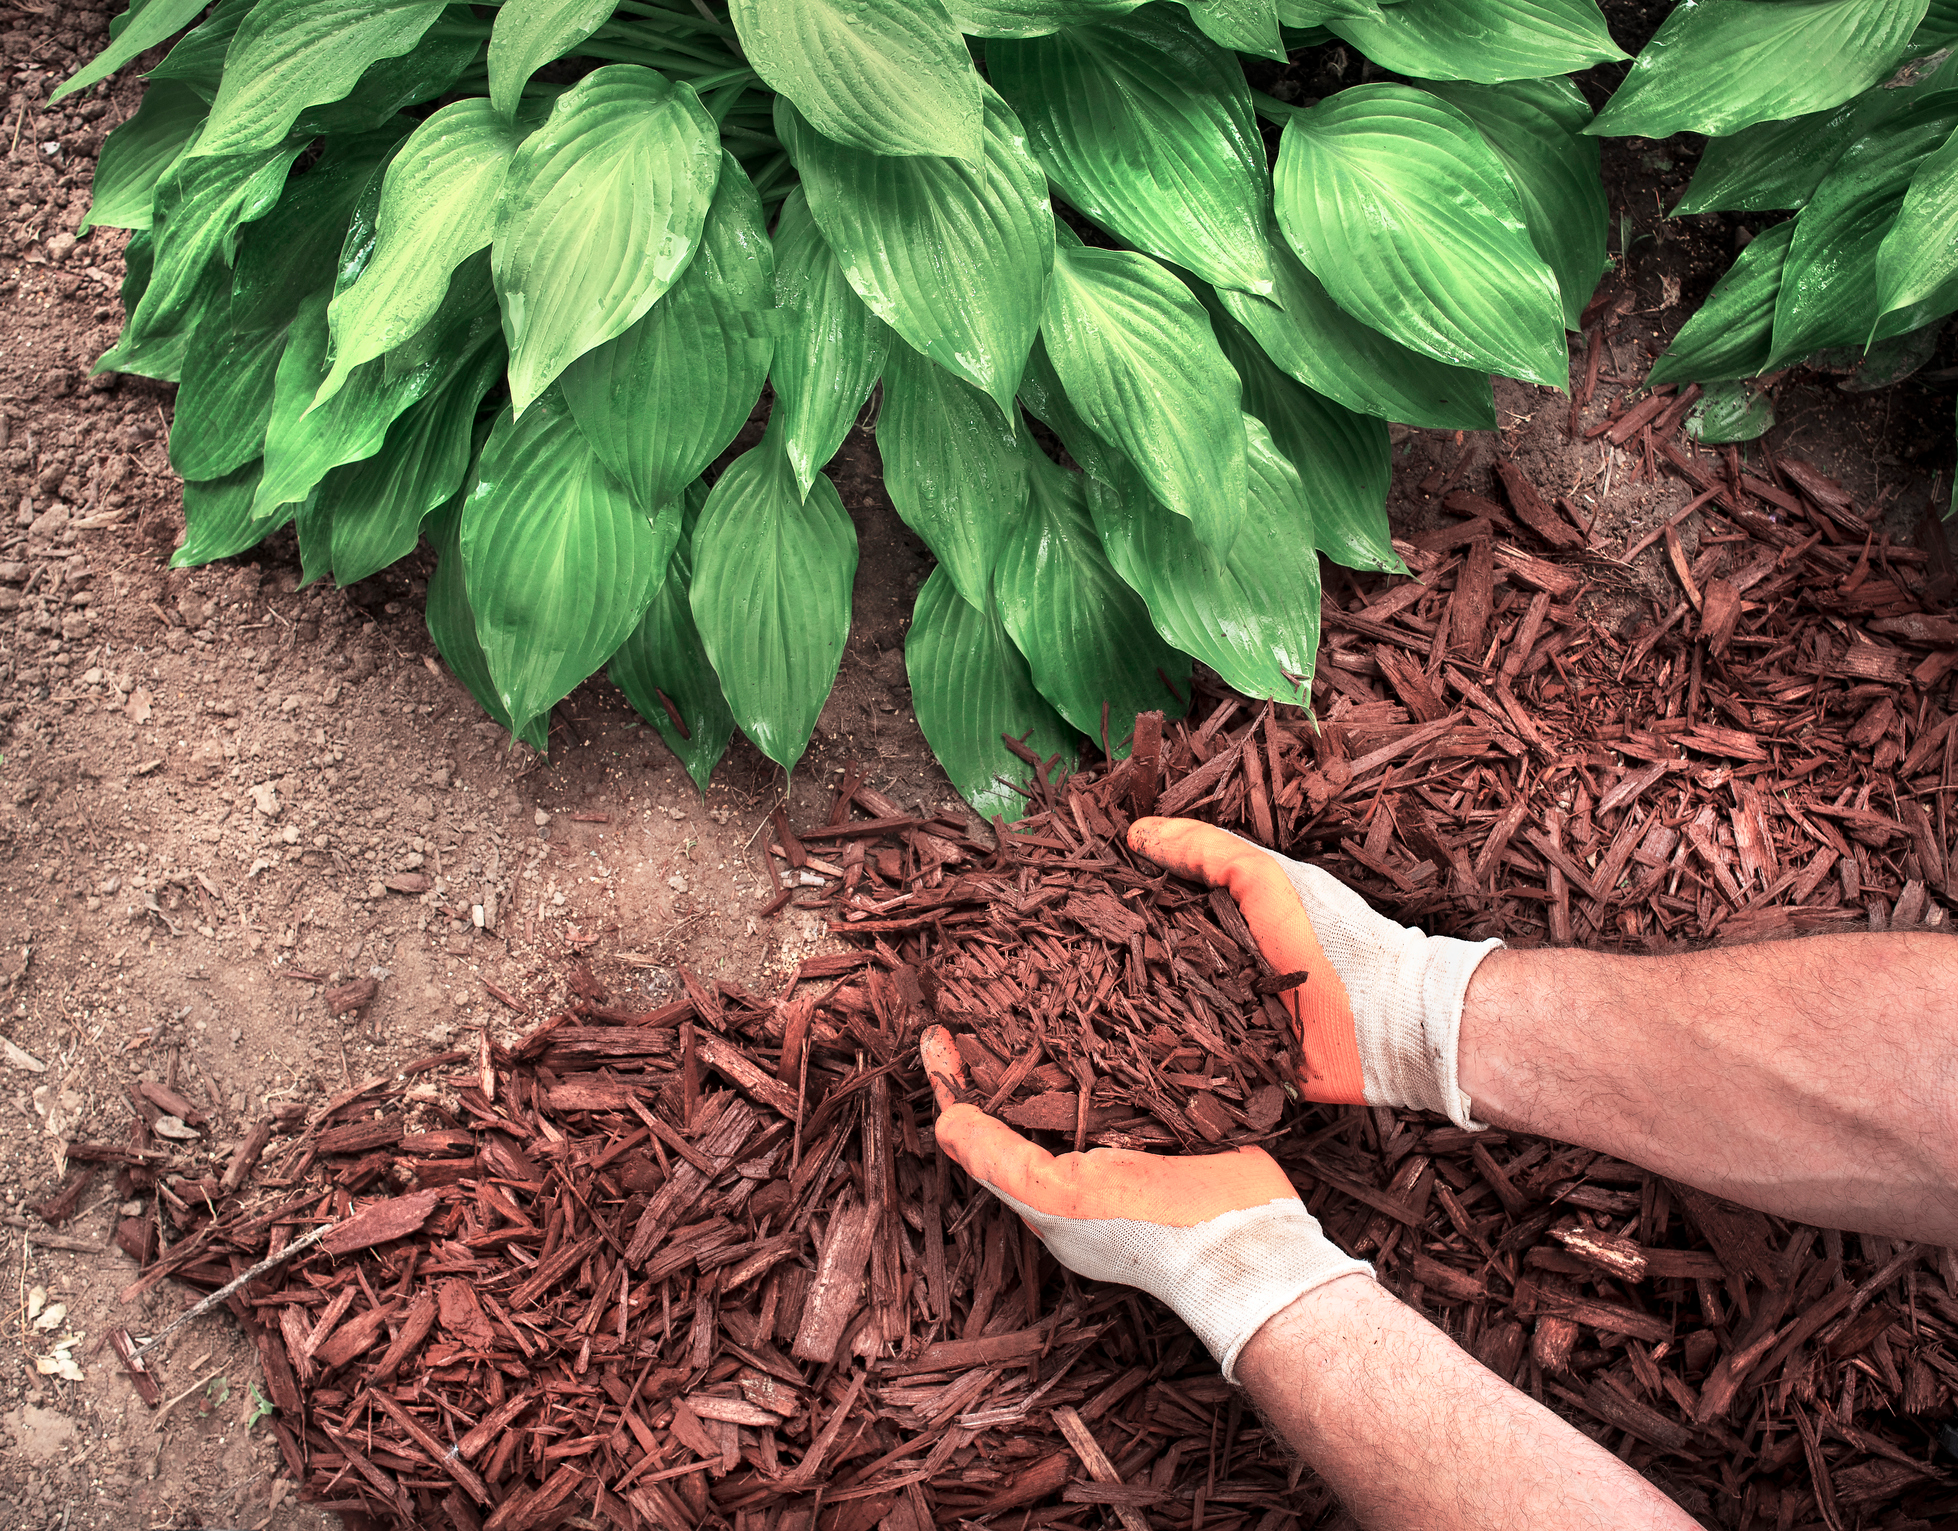 Understand how to apply mulch properly to benefit your landscape.